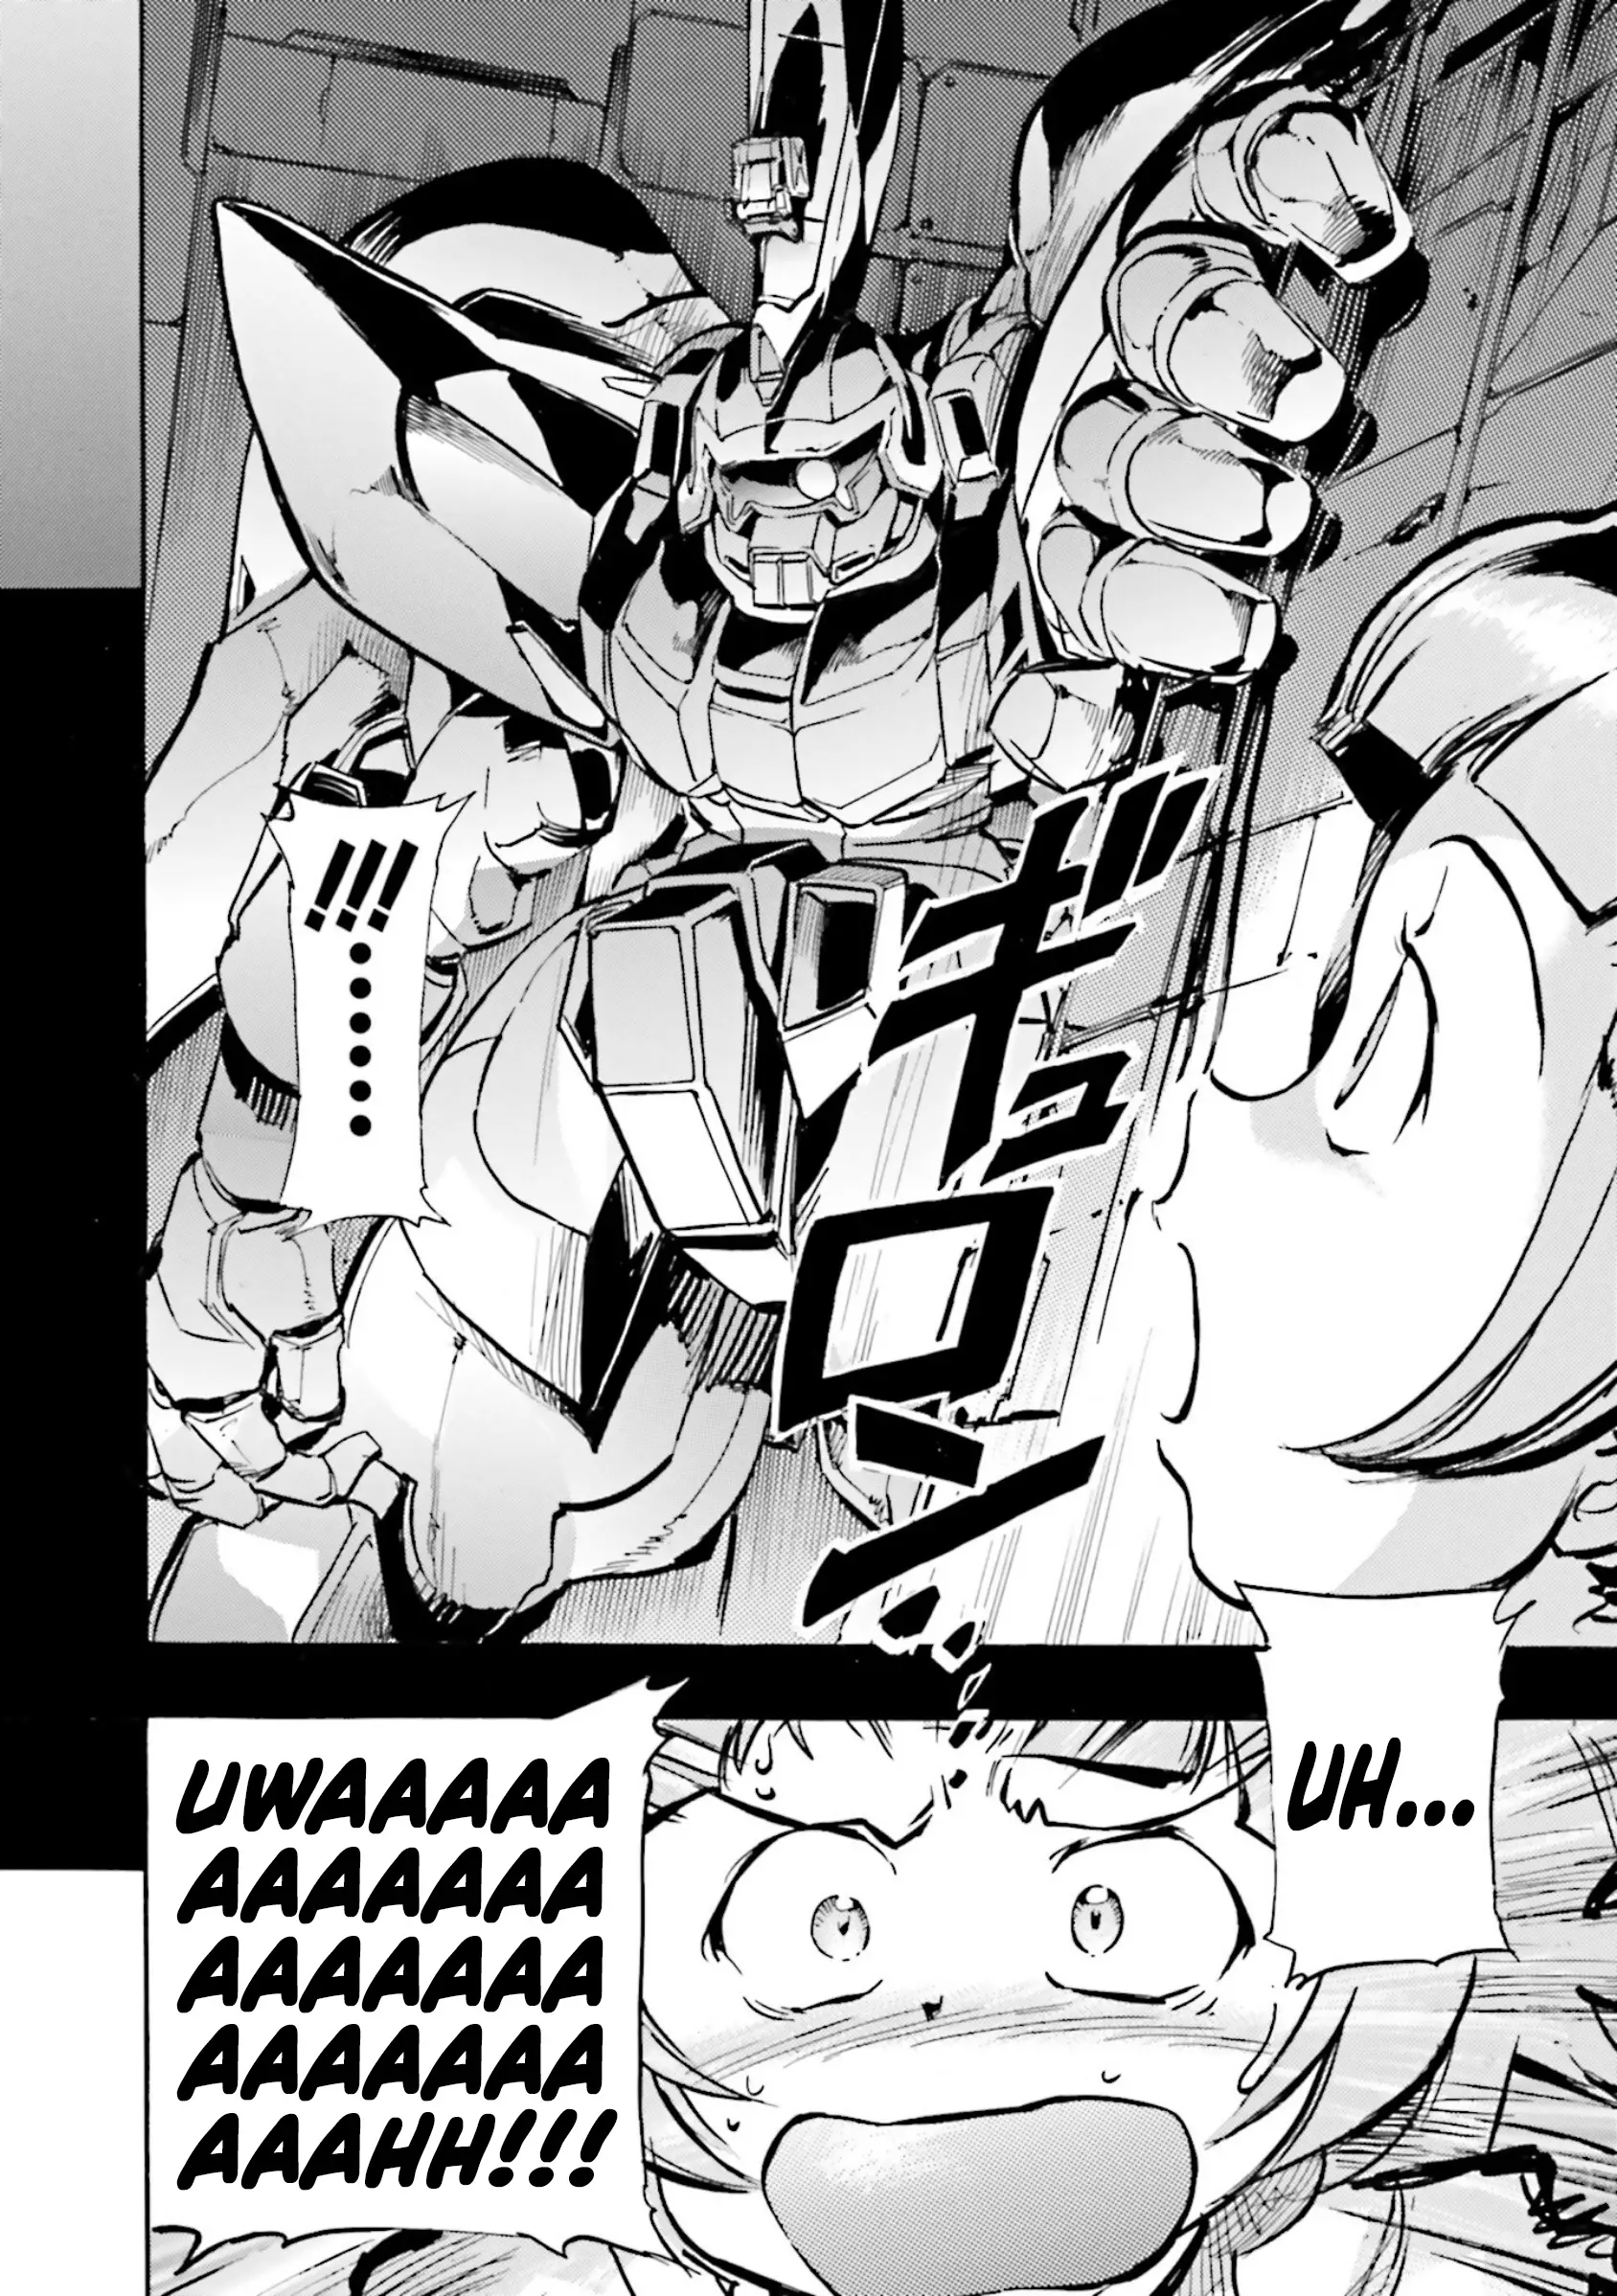 Mobile Suit Gundam Seed Astray R - 3 page 22-6830eeff